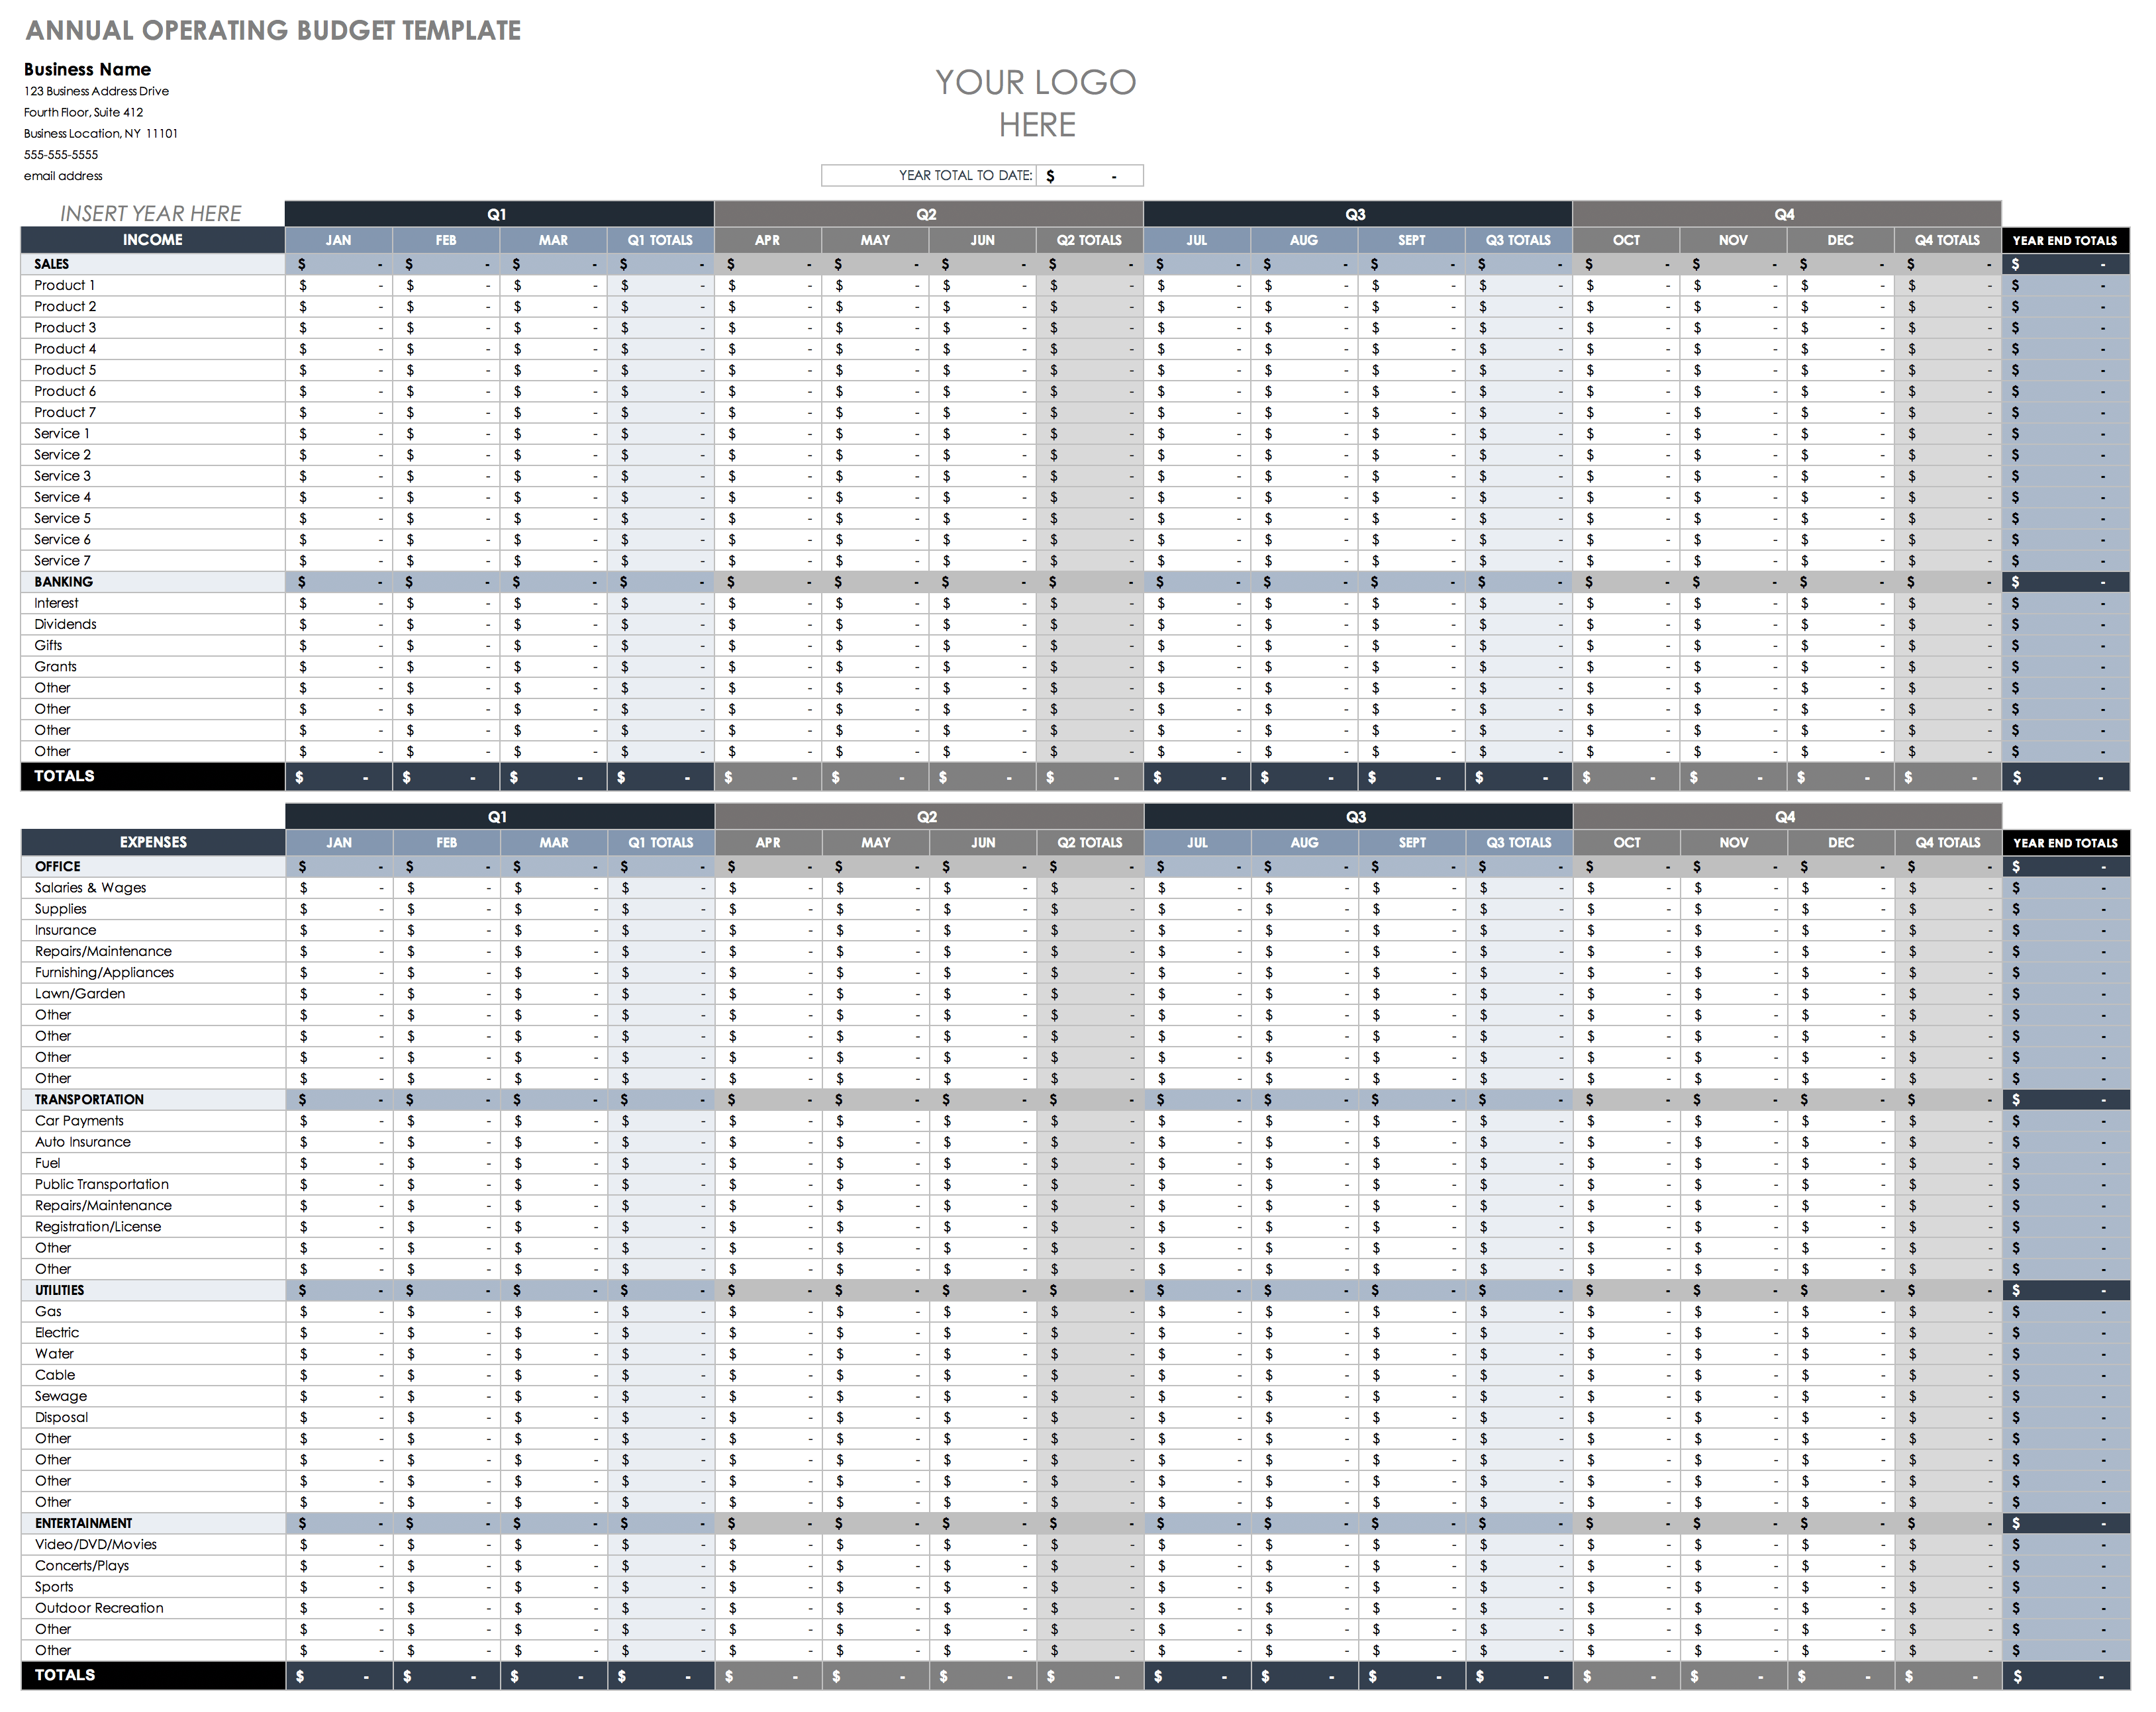 Free Annual Business Budget Templates  Smartsheet With Annual Expense Budget Template Inside Annual Expense Budget Template